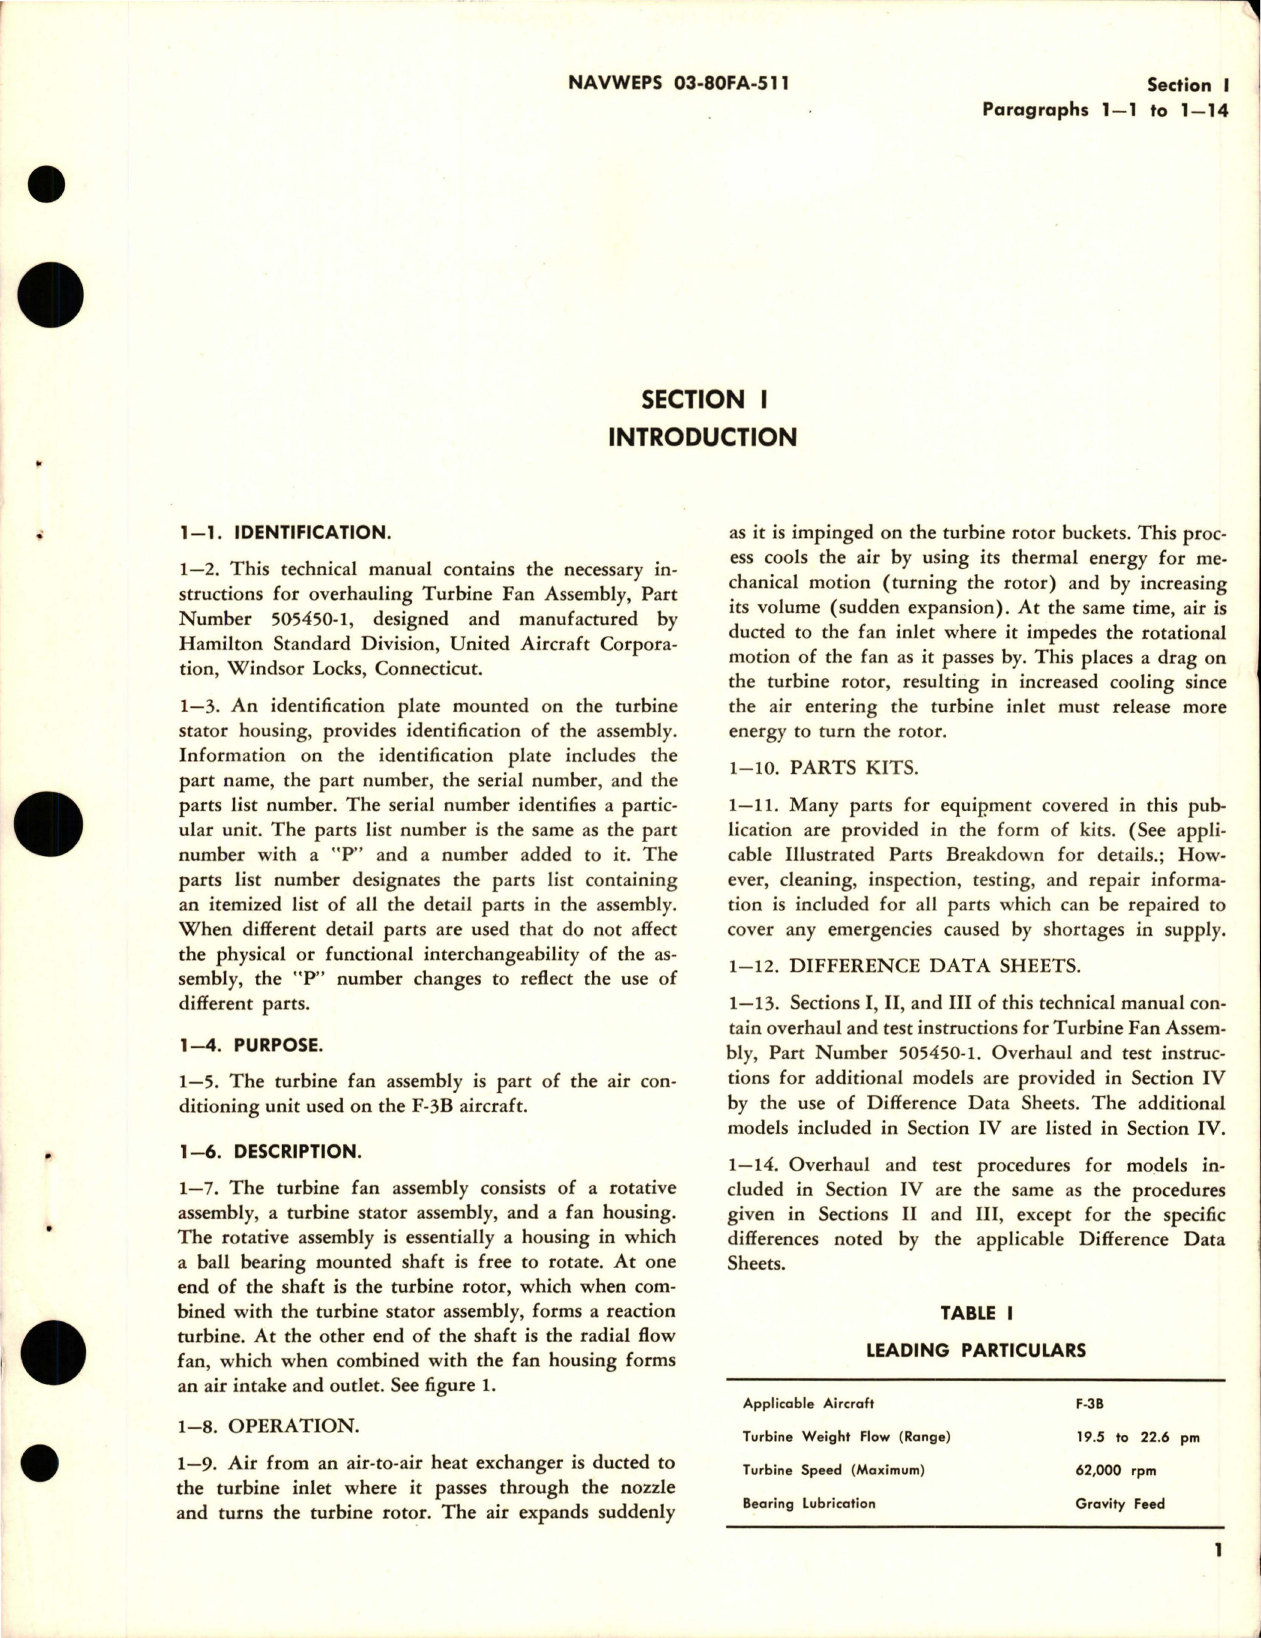 Sample page 5 from AirCorps Library document: Overhaul Instructions for Turbine Fan Assembly - Parts 505450-1 and 505450 